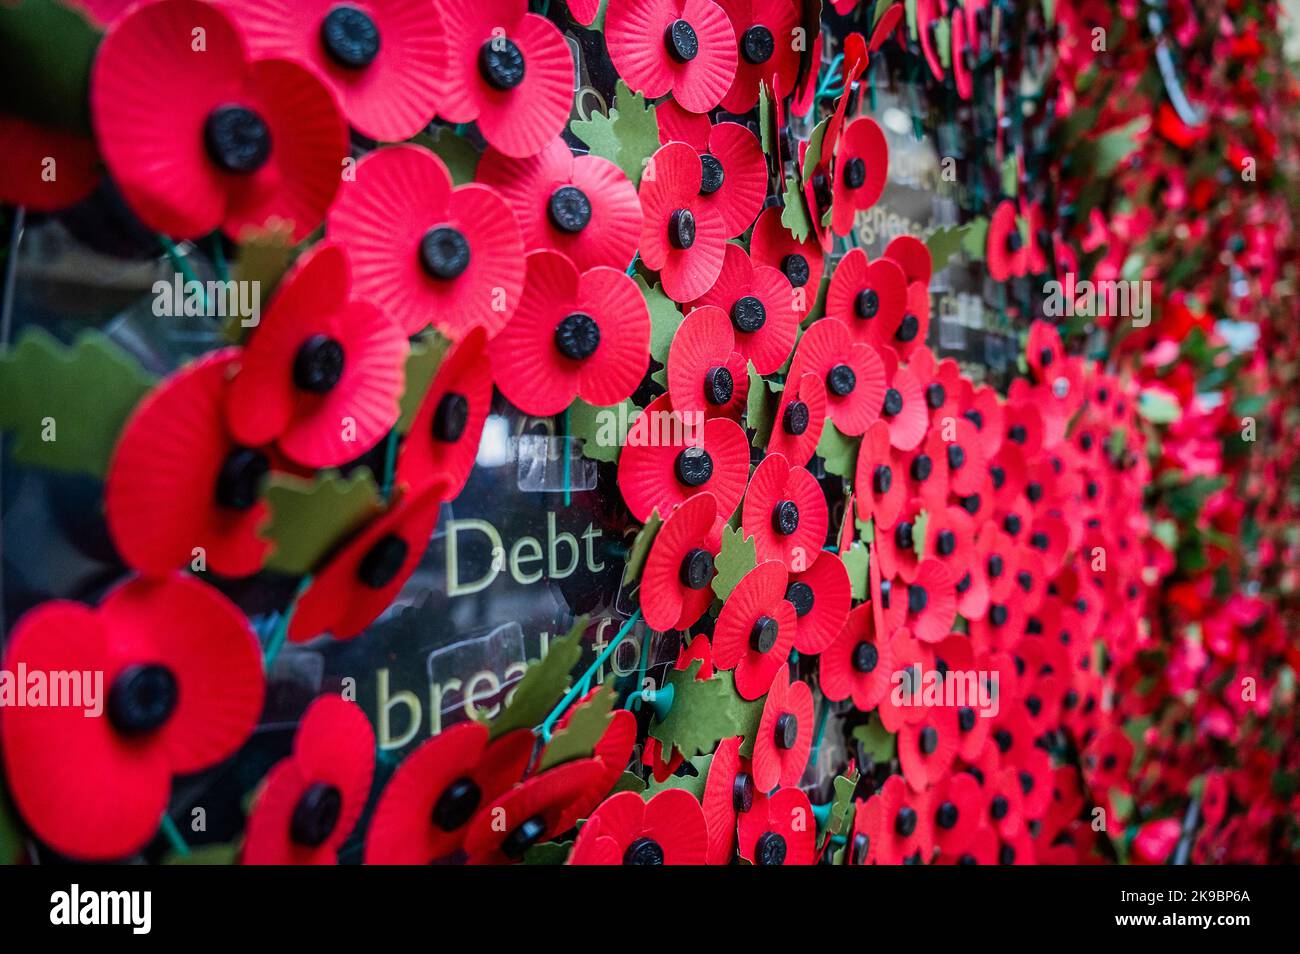 London, UK. 27th Oct, 2022. The Royal British Legion's Poppy Appeal 2022 launches with a 6-metre-wide wall of poppies featuring stories of veterans, RBL beneficiaries (many having received lifechanging support) and their families - the people behind the poppy. Members of the public were invited to take a paper poppy from the wall to uncover the stories. The charity is urging people to wear a poppy this year to show that they care and that the service and sacrifice of serving personnel, veterans and their families will never be forgotten. Credit: Guy Bell/Alamy Live News Stock Photo